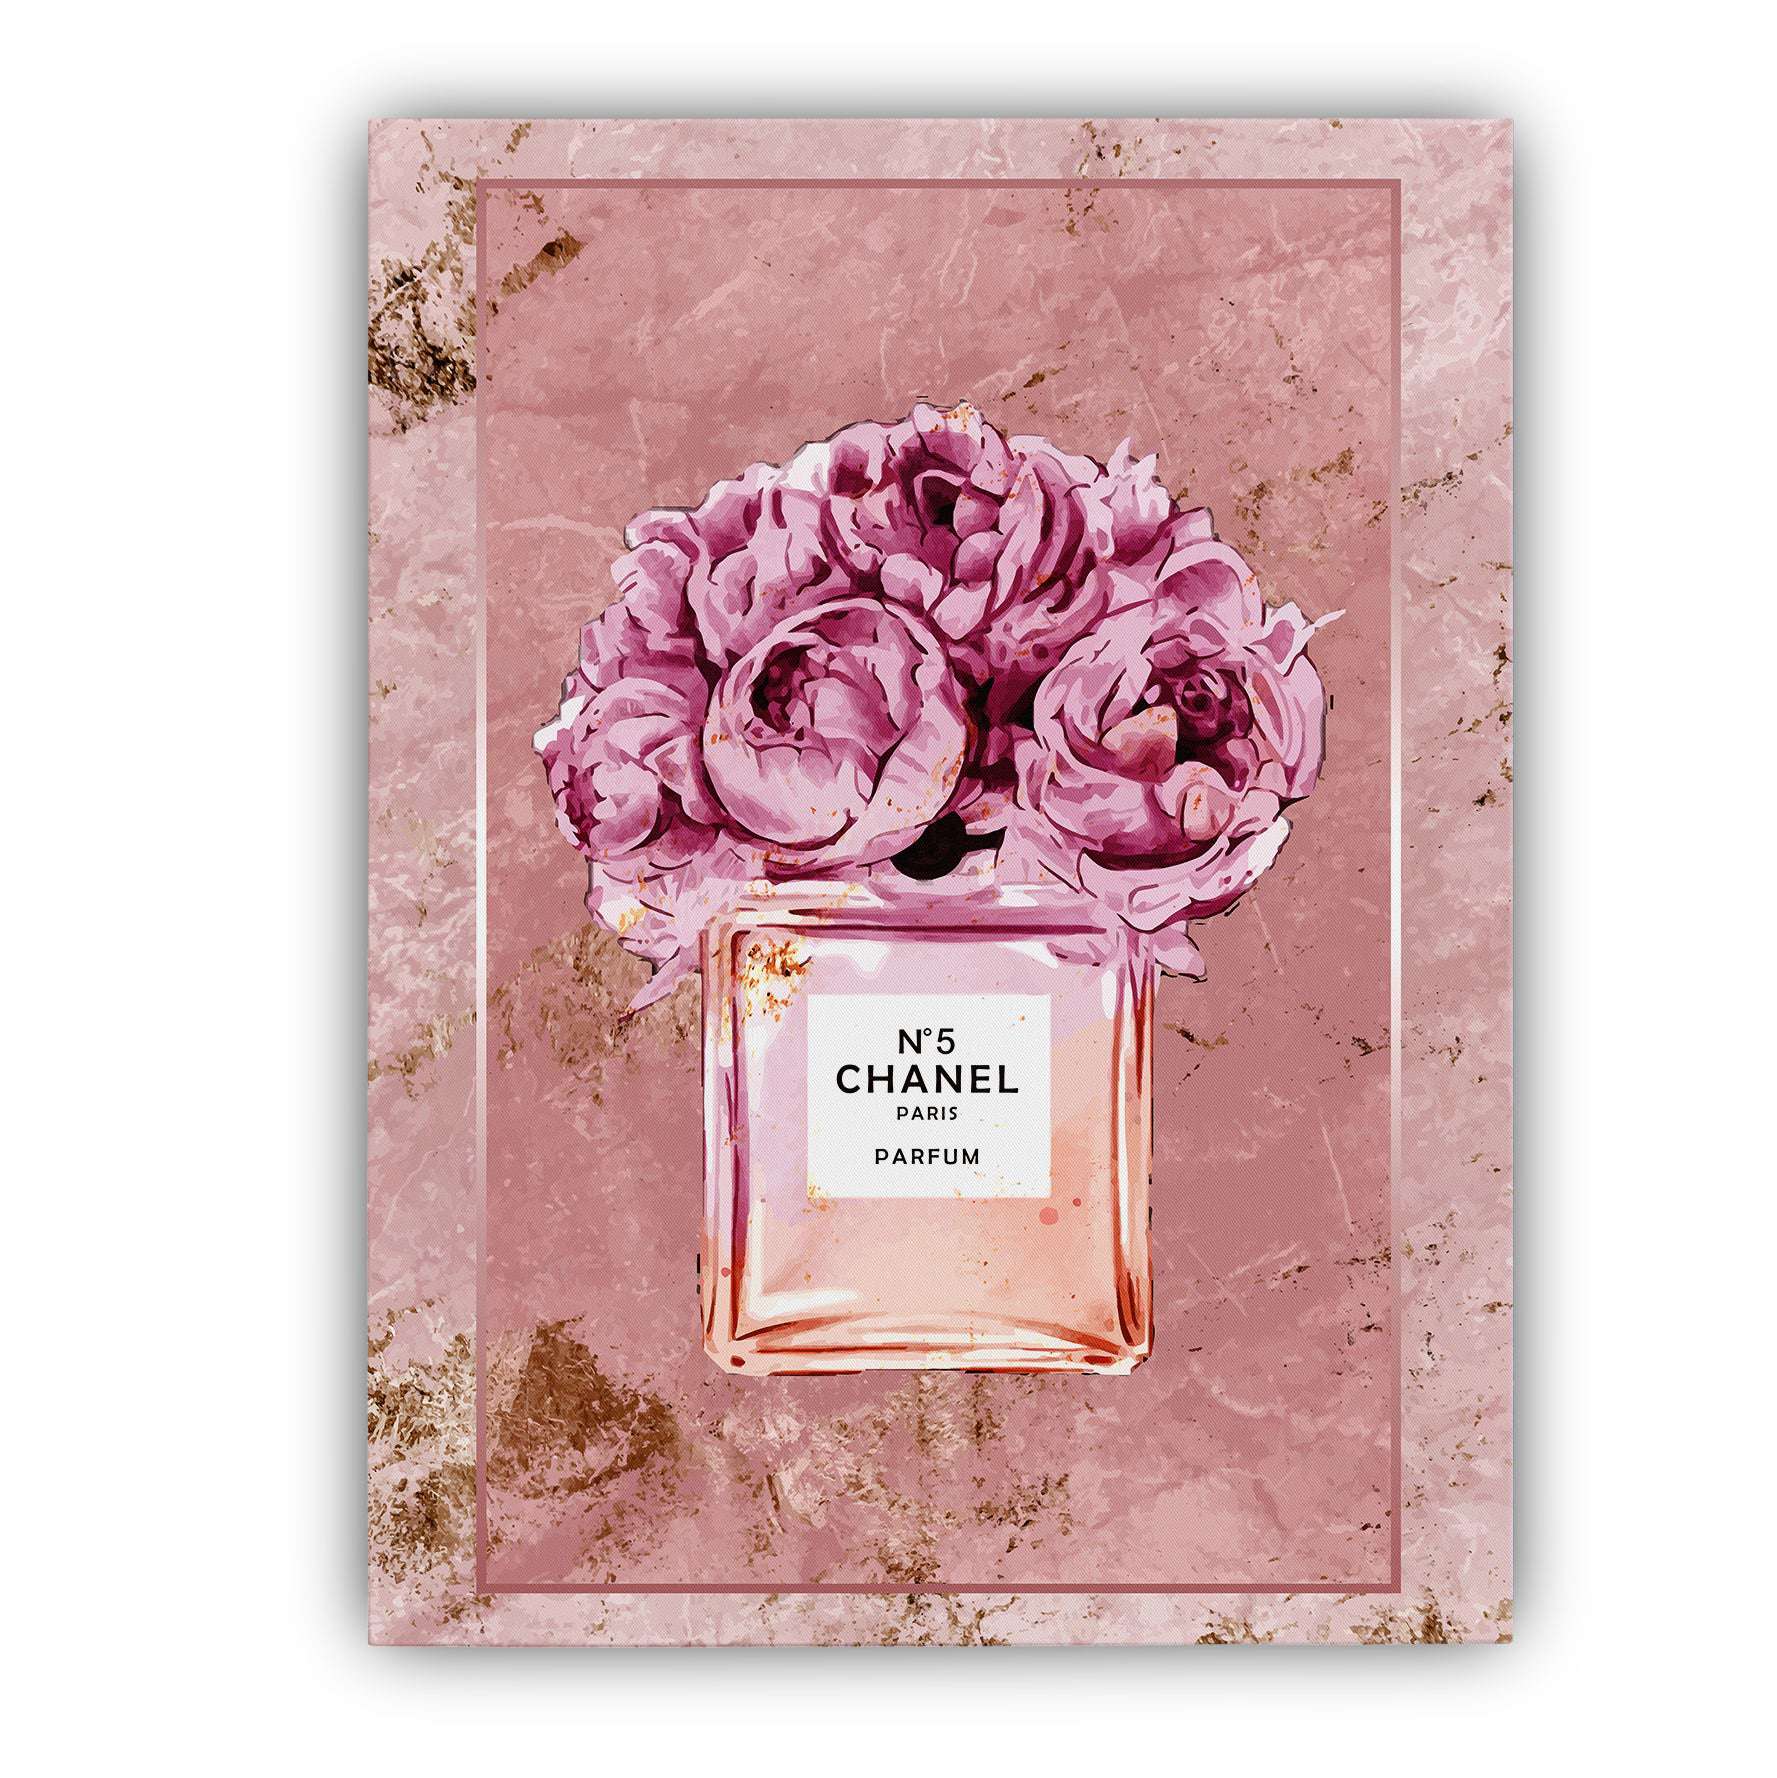 C#5 in Pink' Graphic Art Print on Canvas Picture Perfect International Format: Wrapped Canvas, Size: 40 H x 24 W x 1 D